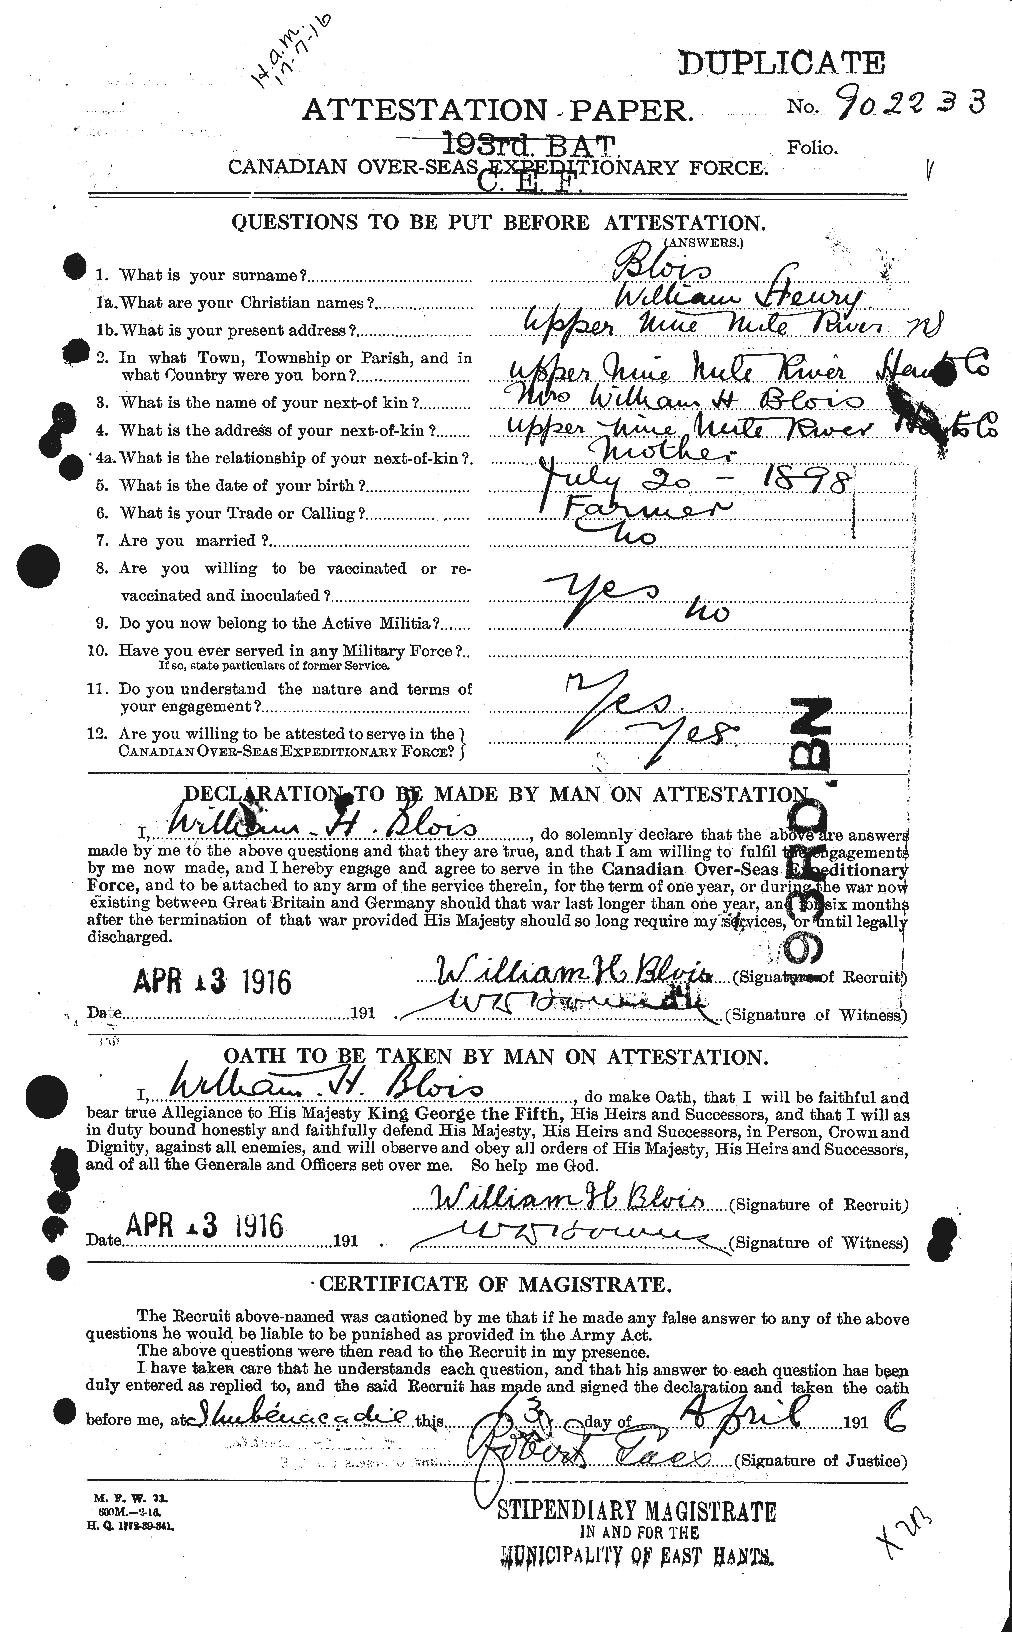 Personnel Records of the First World War - CEF 248455a